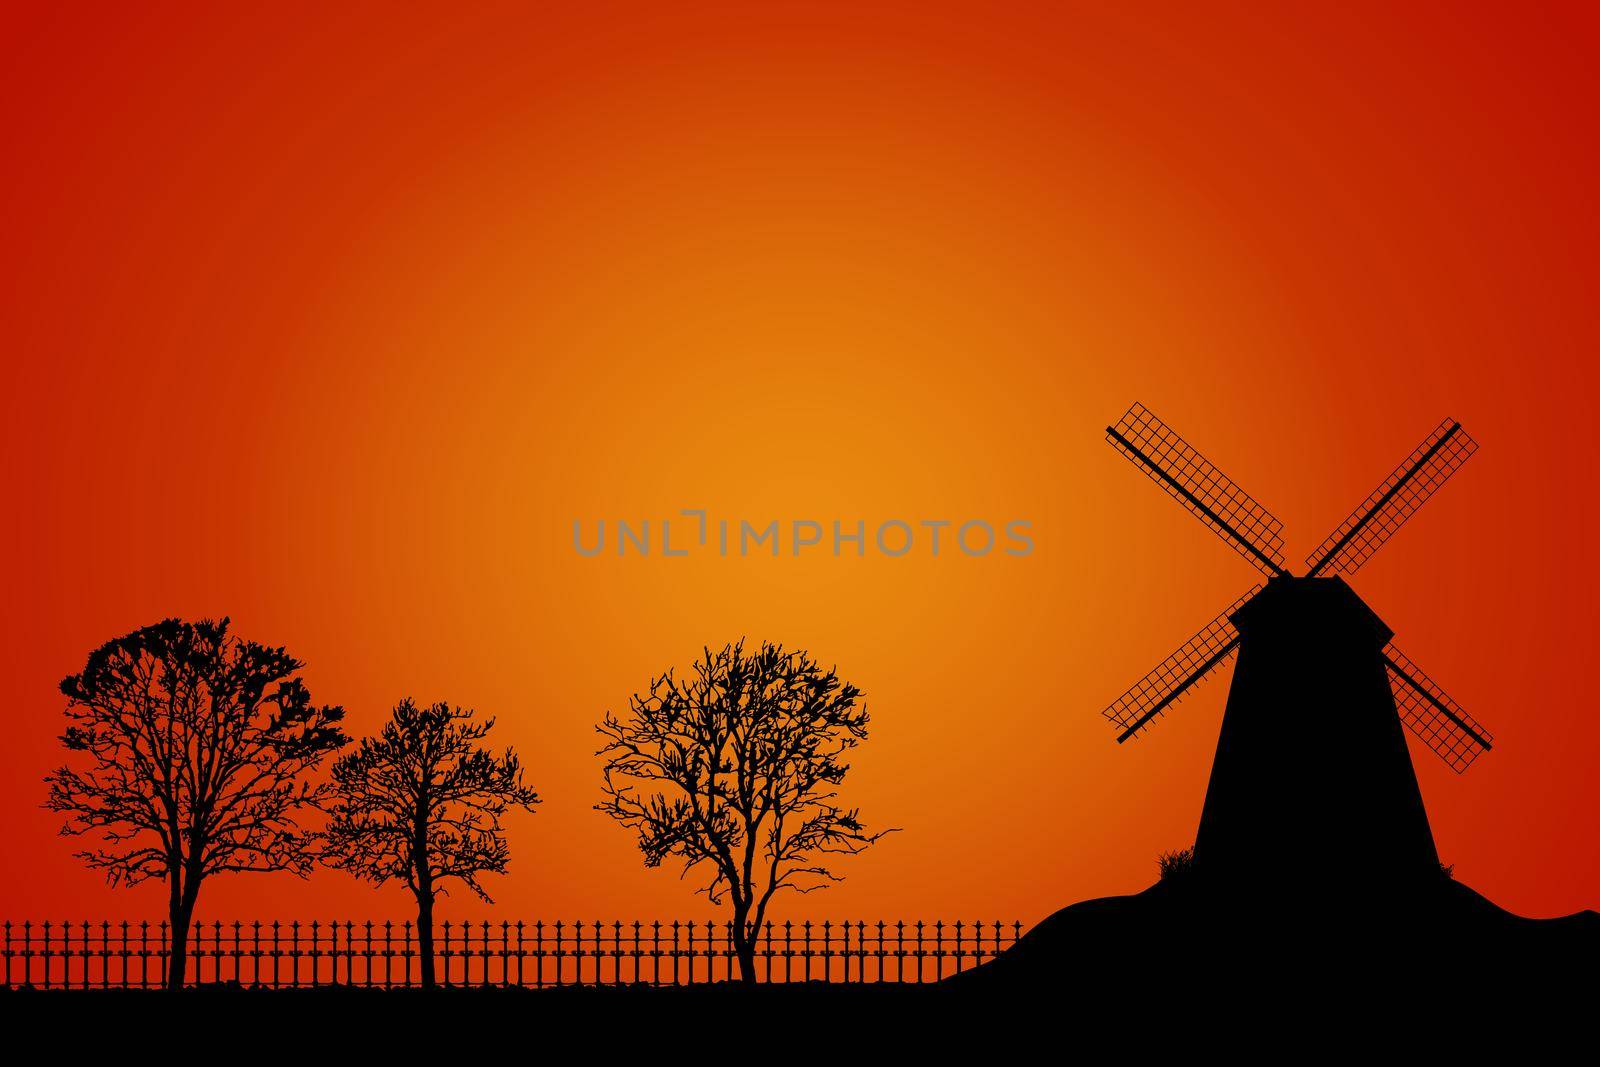 Landscape with windmill, trees and fence silhouette on orange sky background. Dutch rural scenery with wind mill at sunset. Stock vector illustration